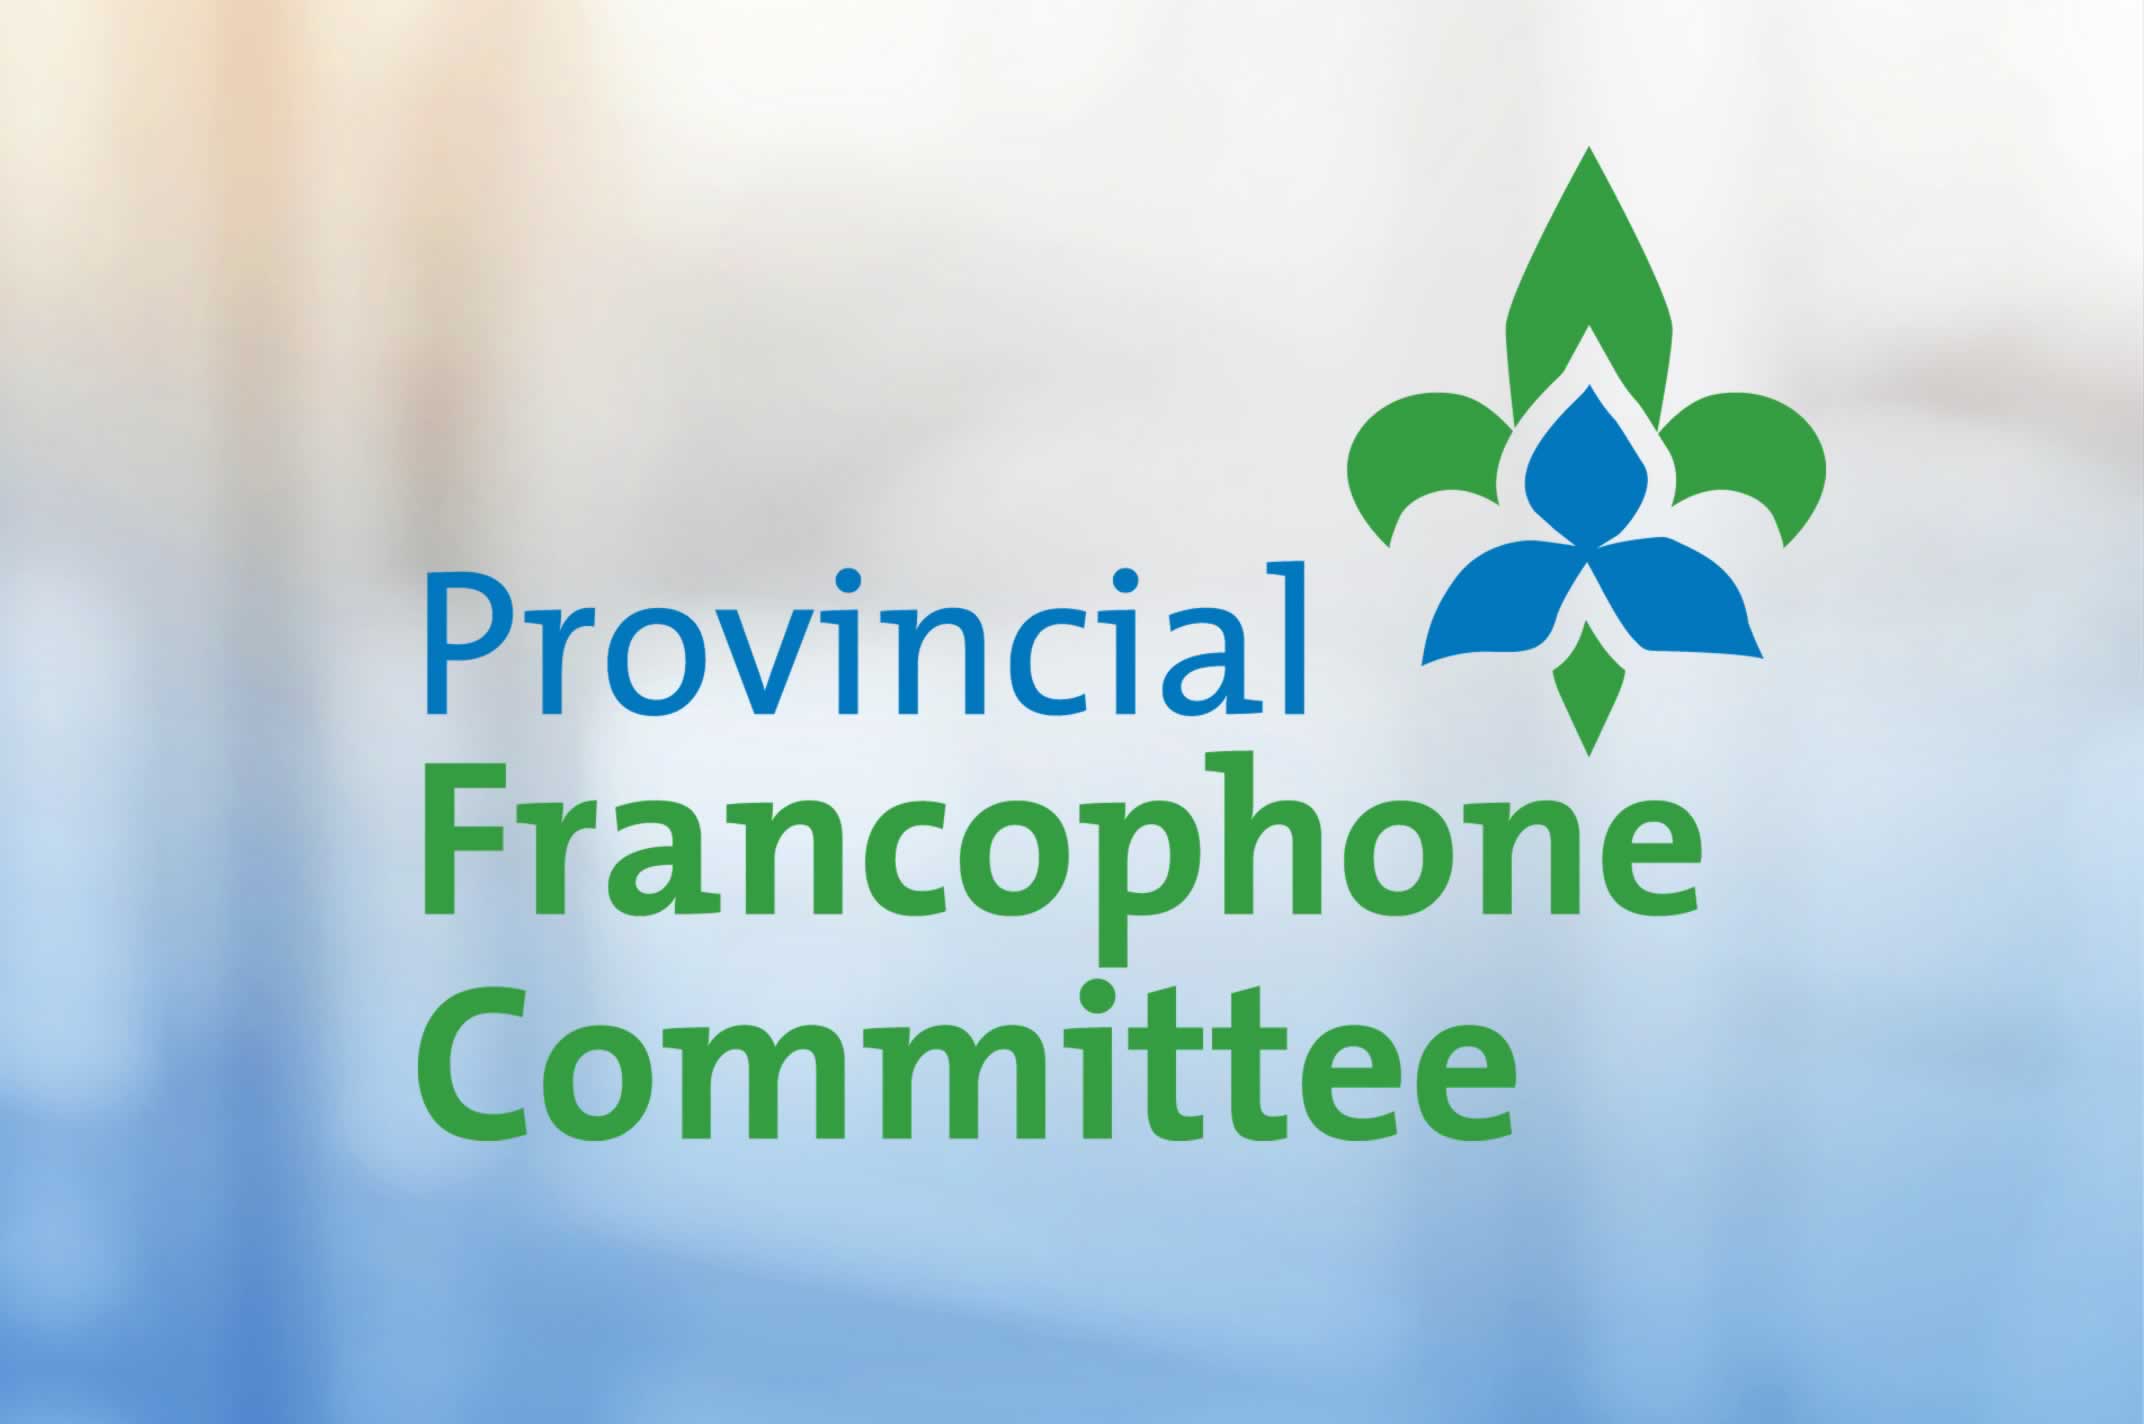 Provincial Francophone committee